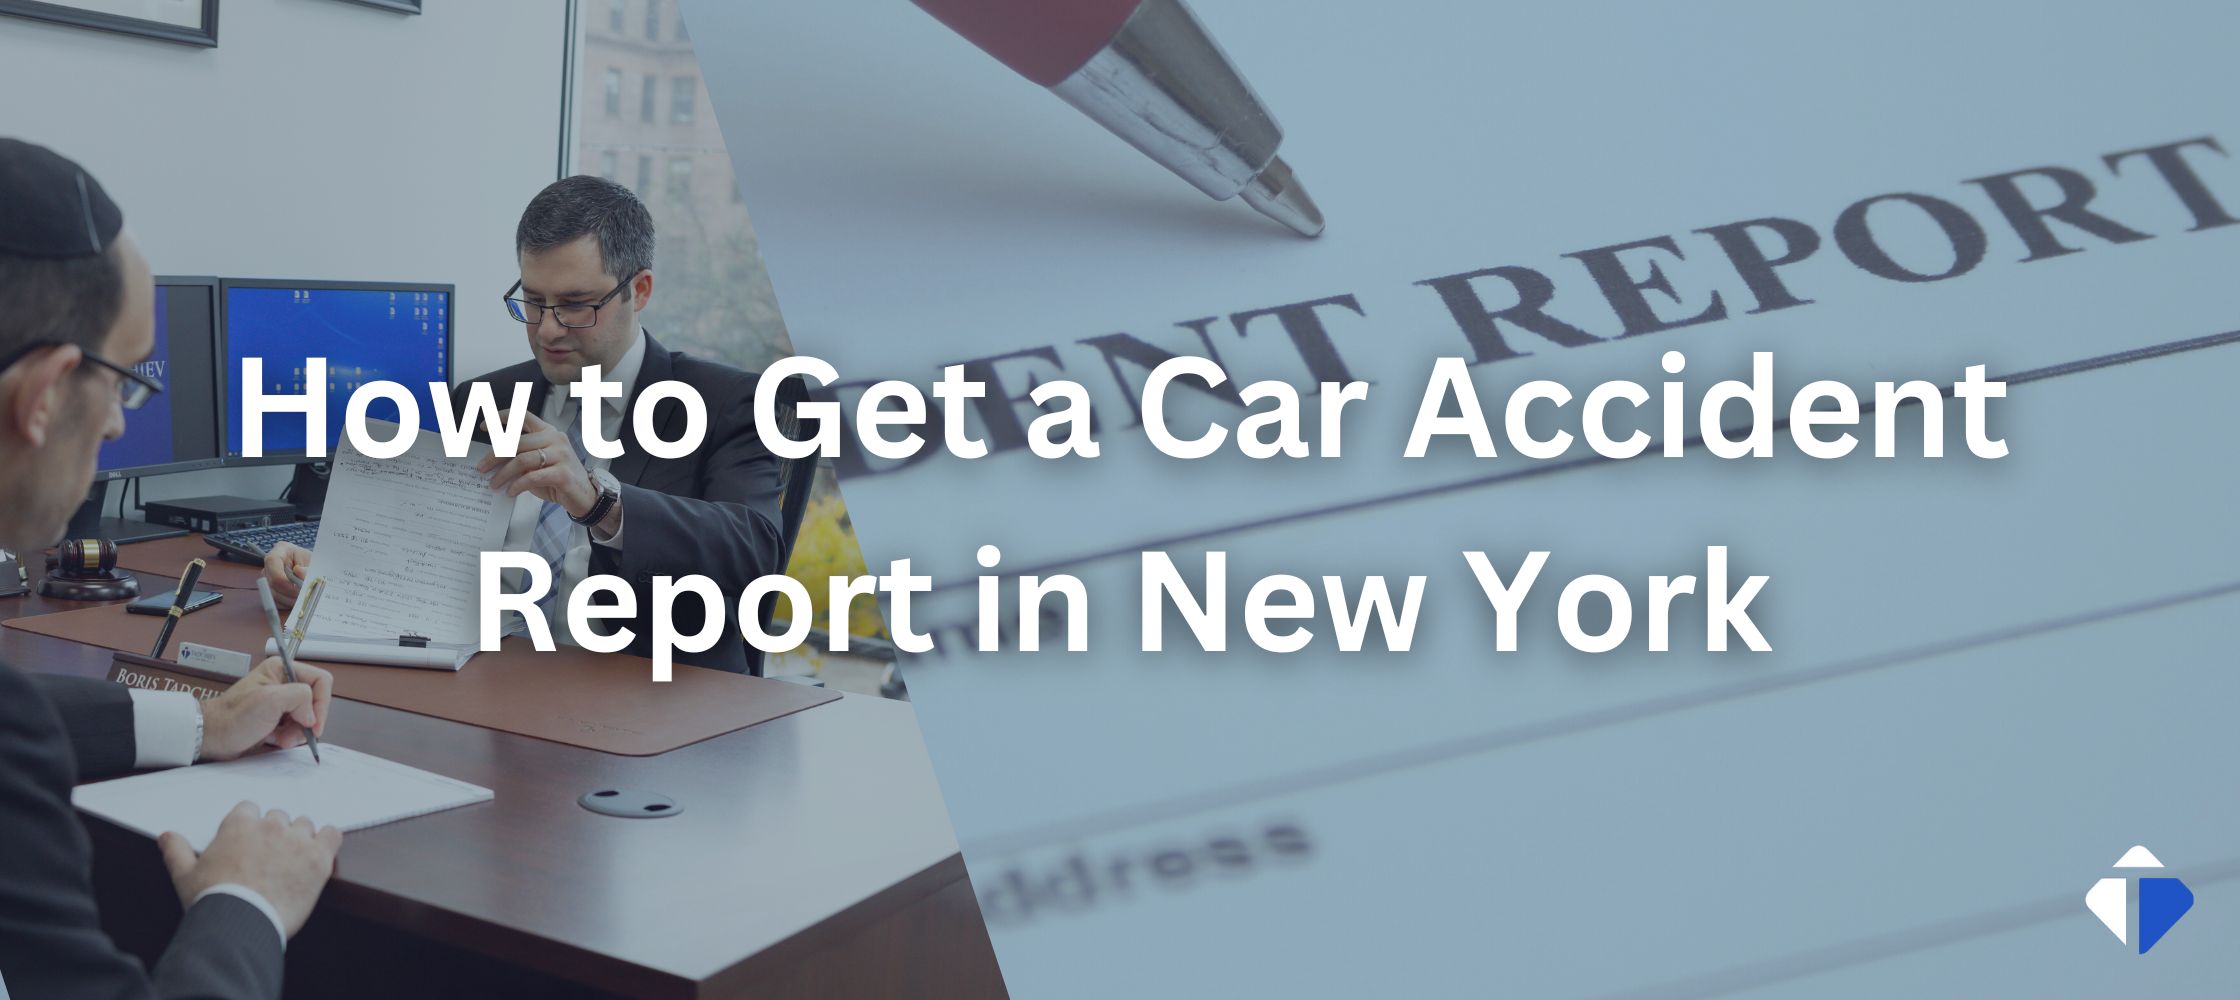 How to Get a Car Accident Report in NY